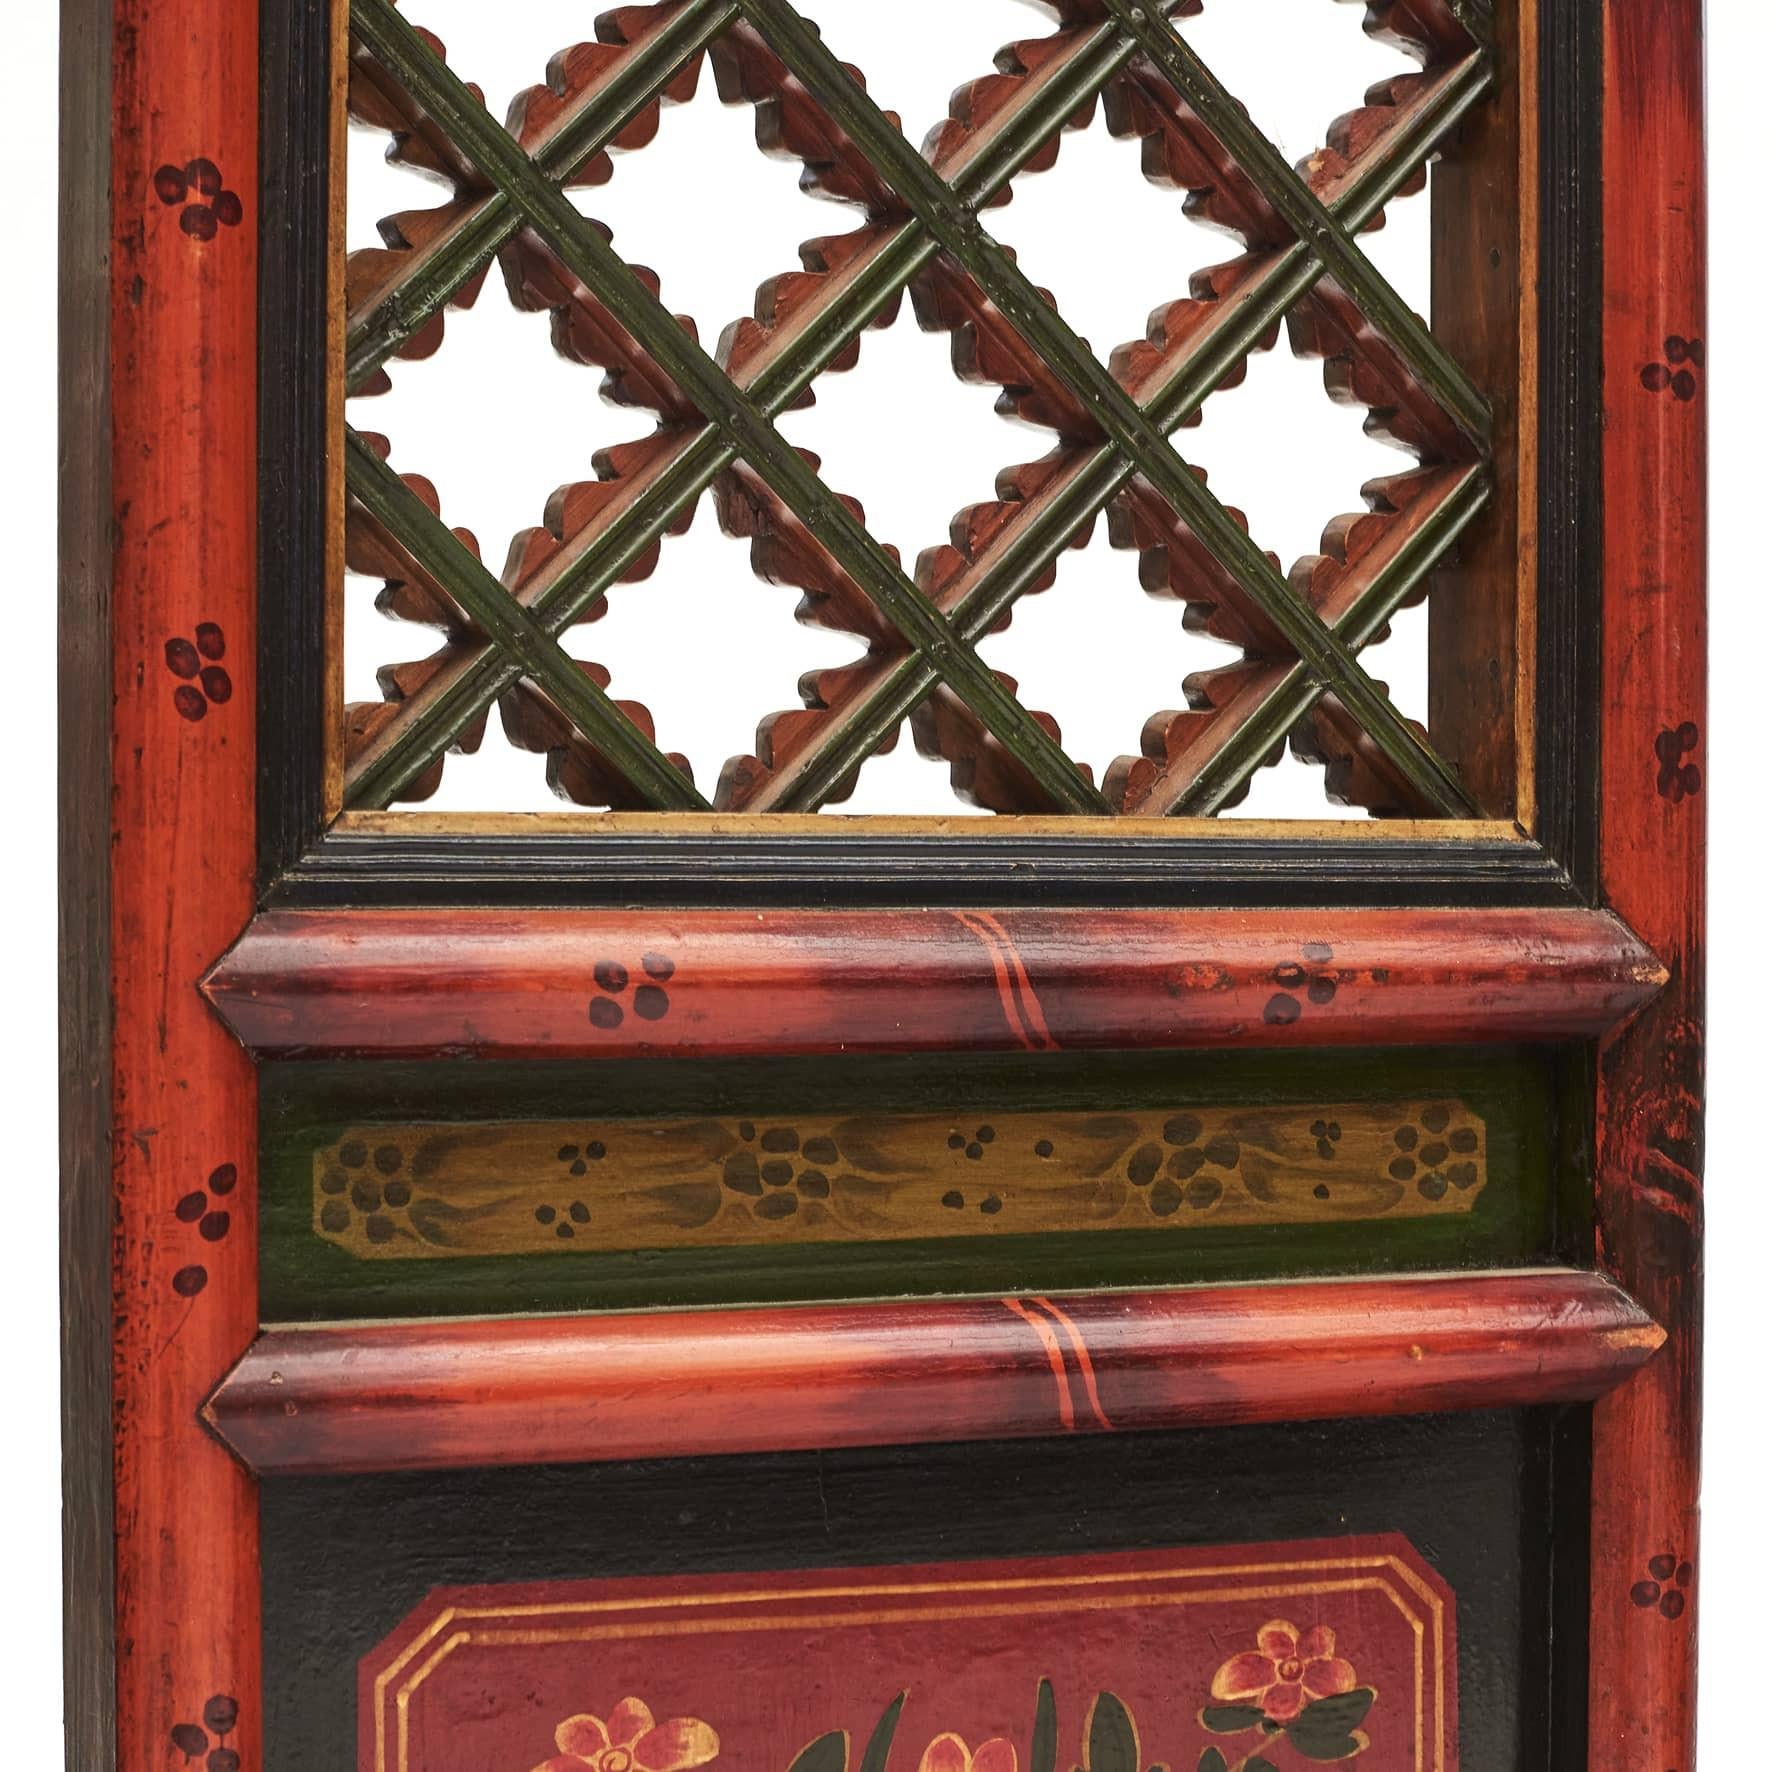 A set of 4 screens, made in elm wood. Lacquer decorated in polychrome.
Panels decorated with vases, flowers, etc.

Former screen wall from house in Shanxi province 1860 - 1880.

Original well preserved condition.